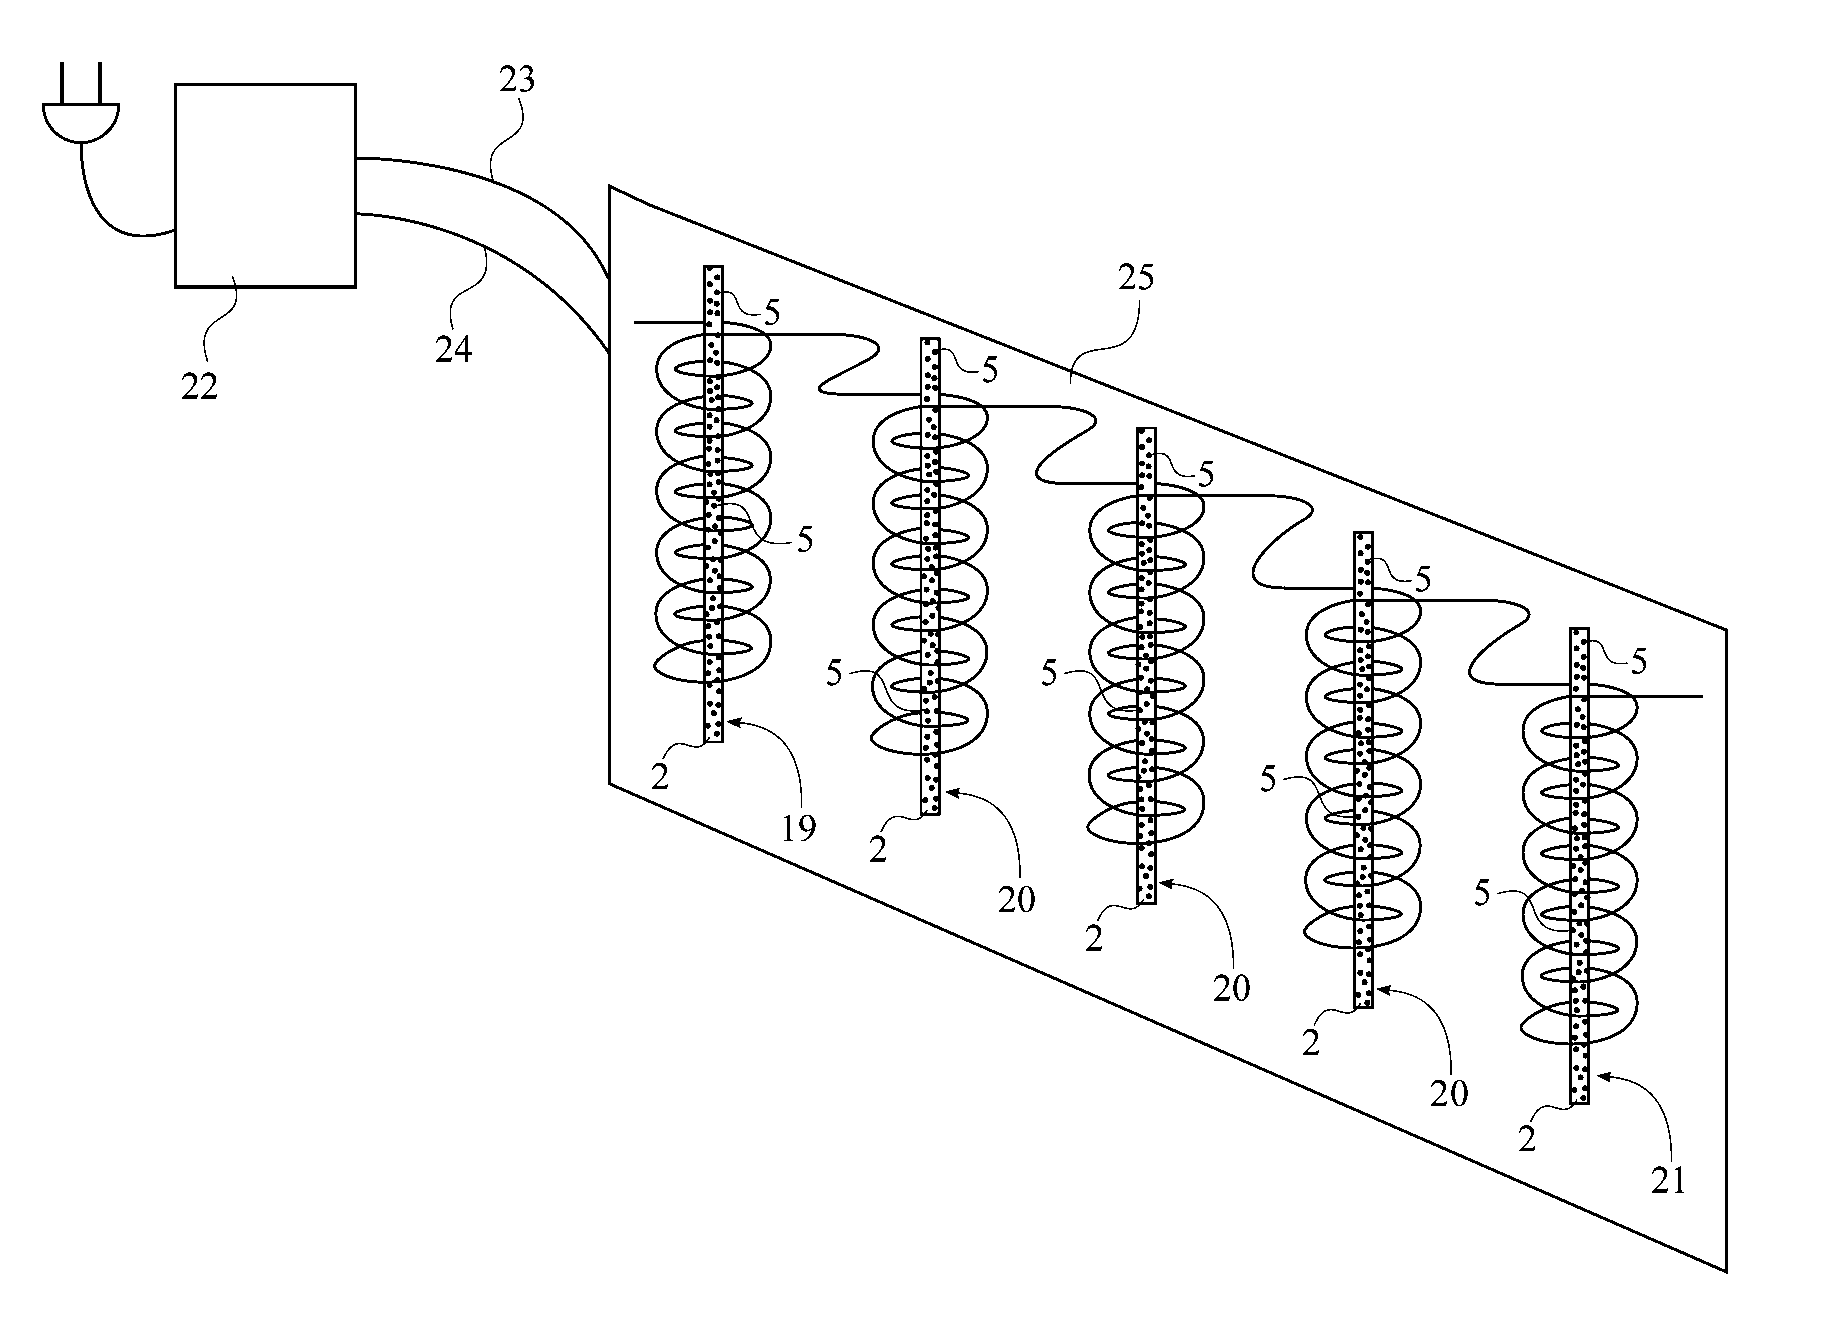 Apparatus for creating a vortex system that intensifies the multiple vibrational magnetic high frequency fields